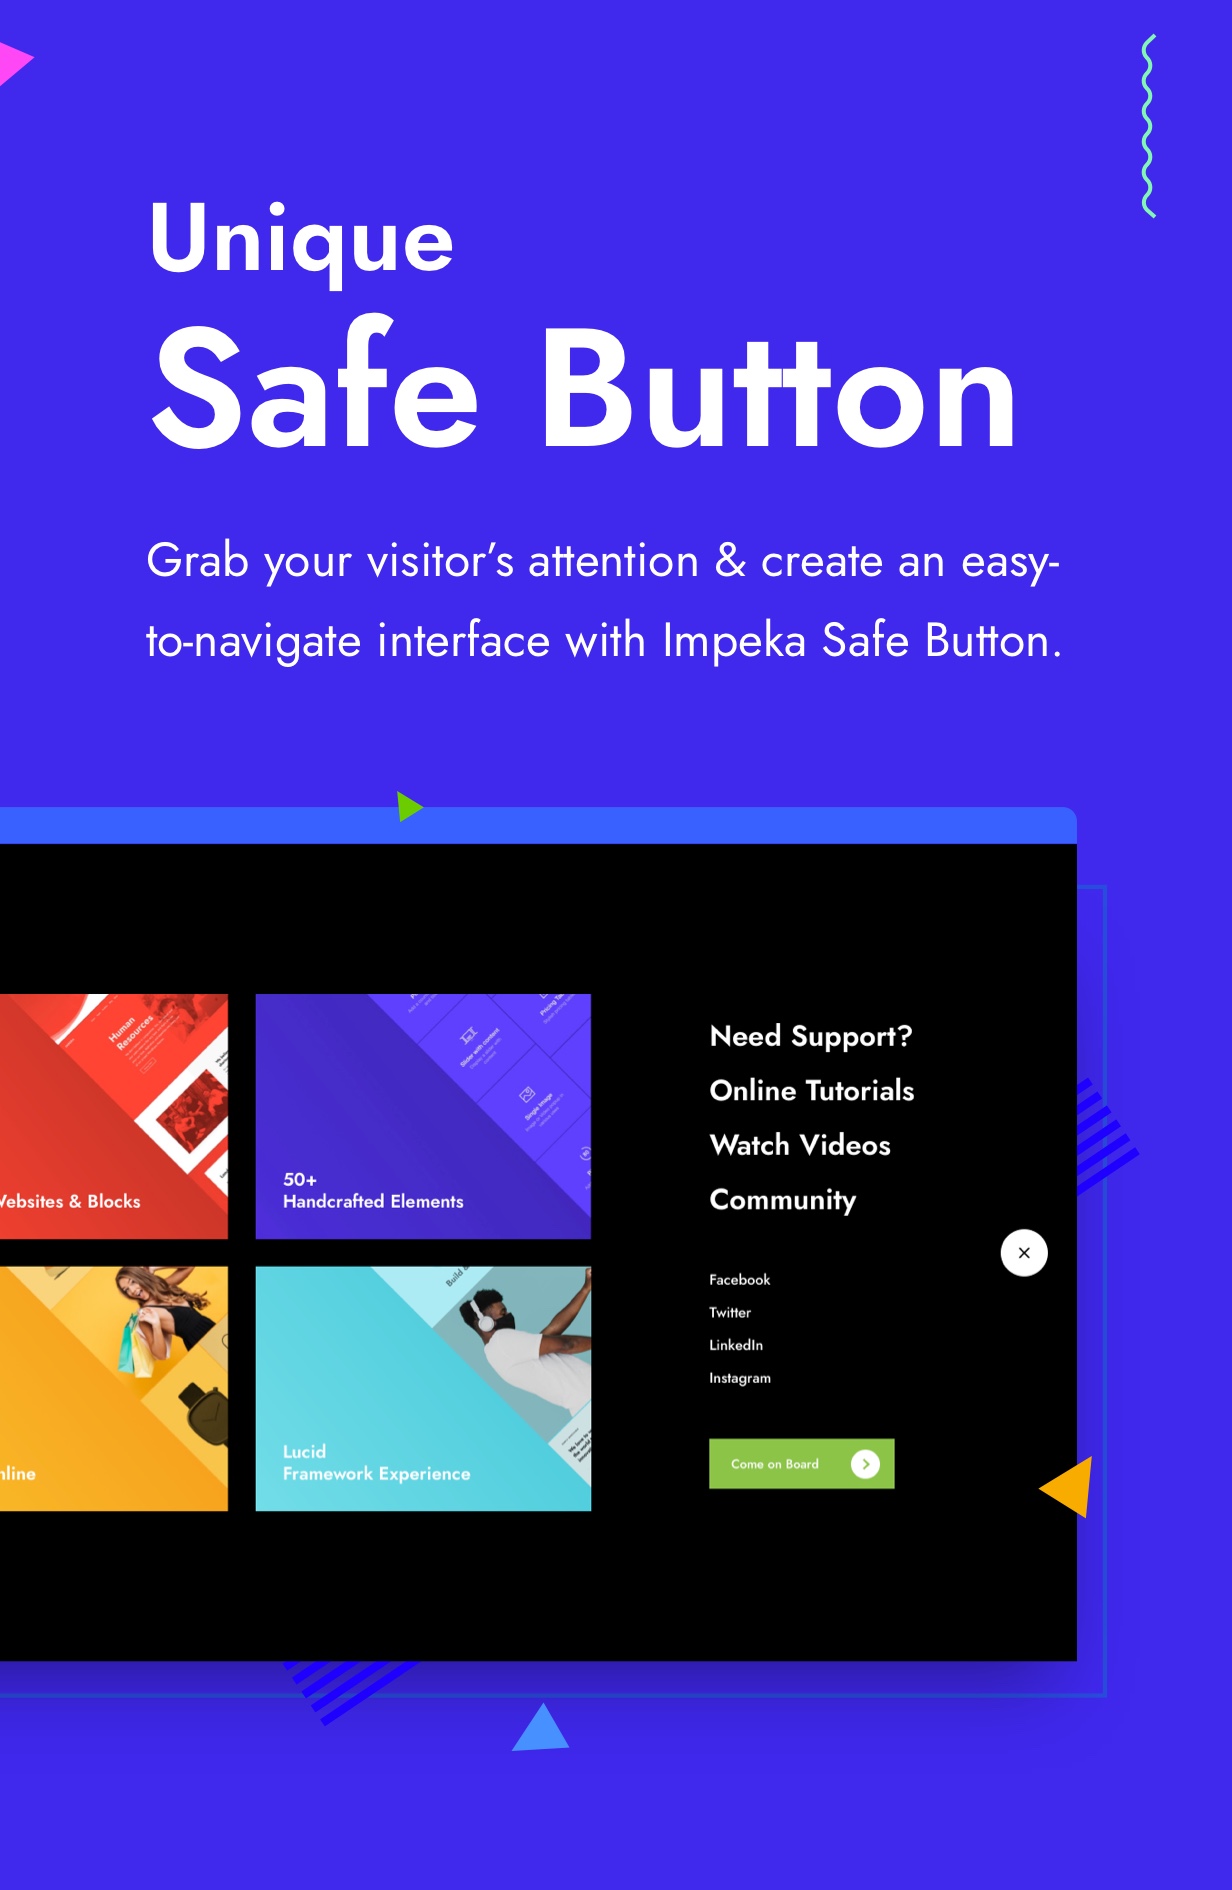 Impeka Premium Multipurpose WordPress theme by Greatives, Safe Button feature